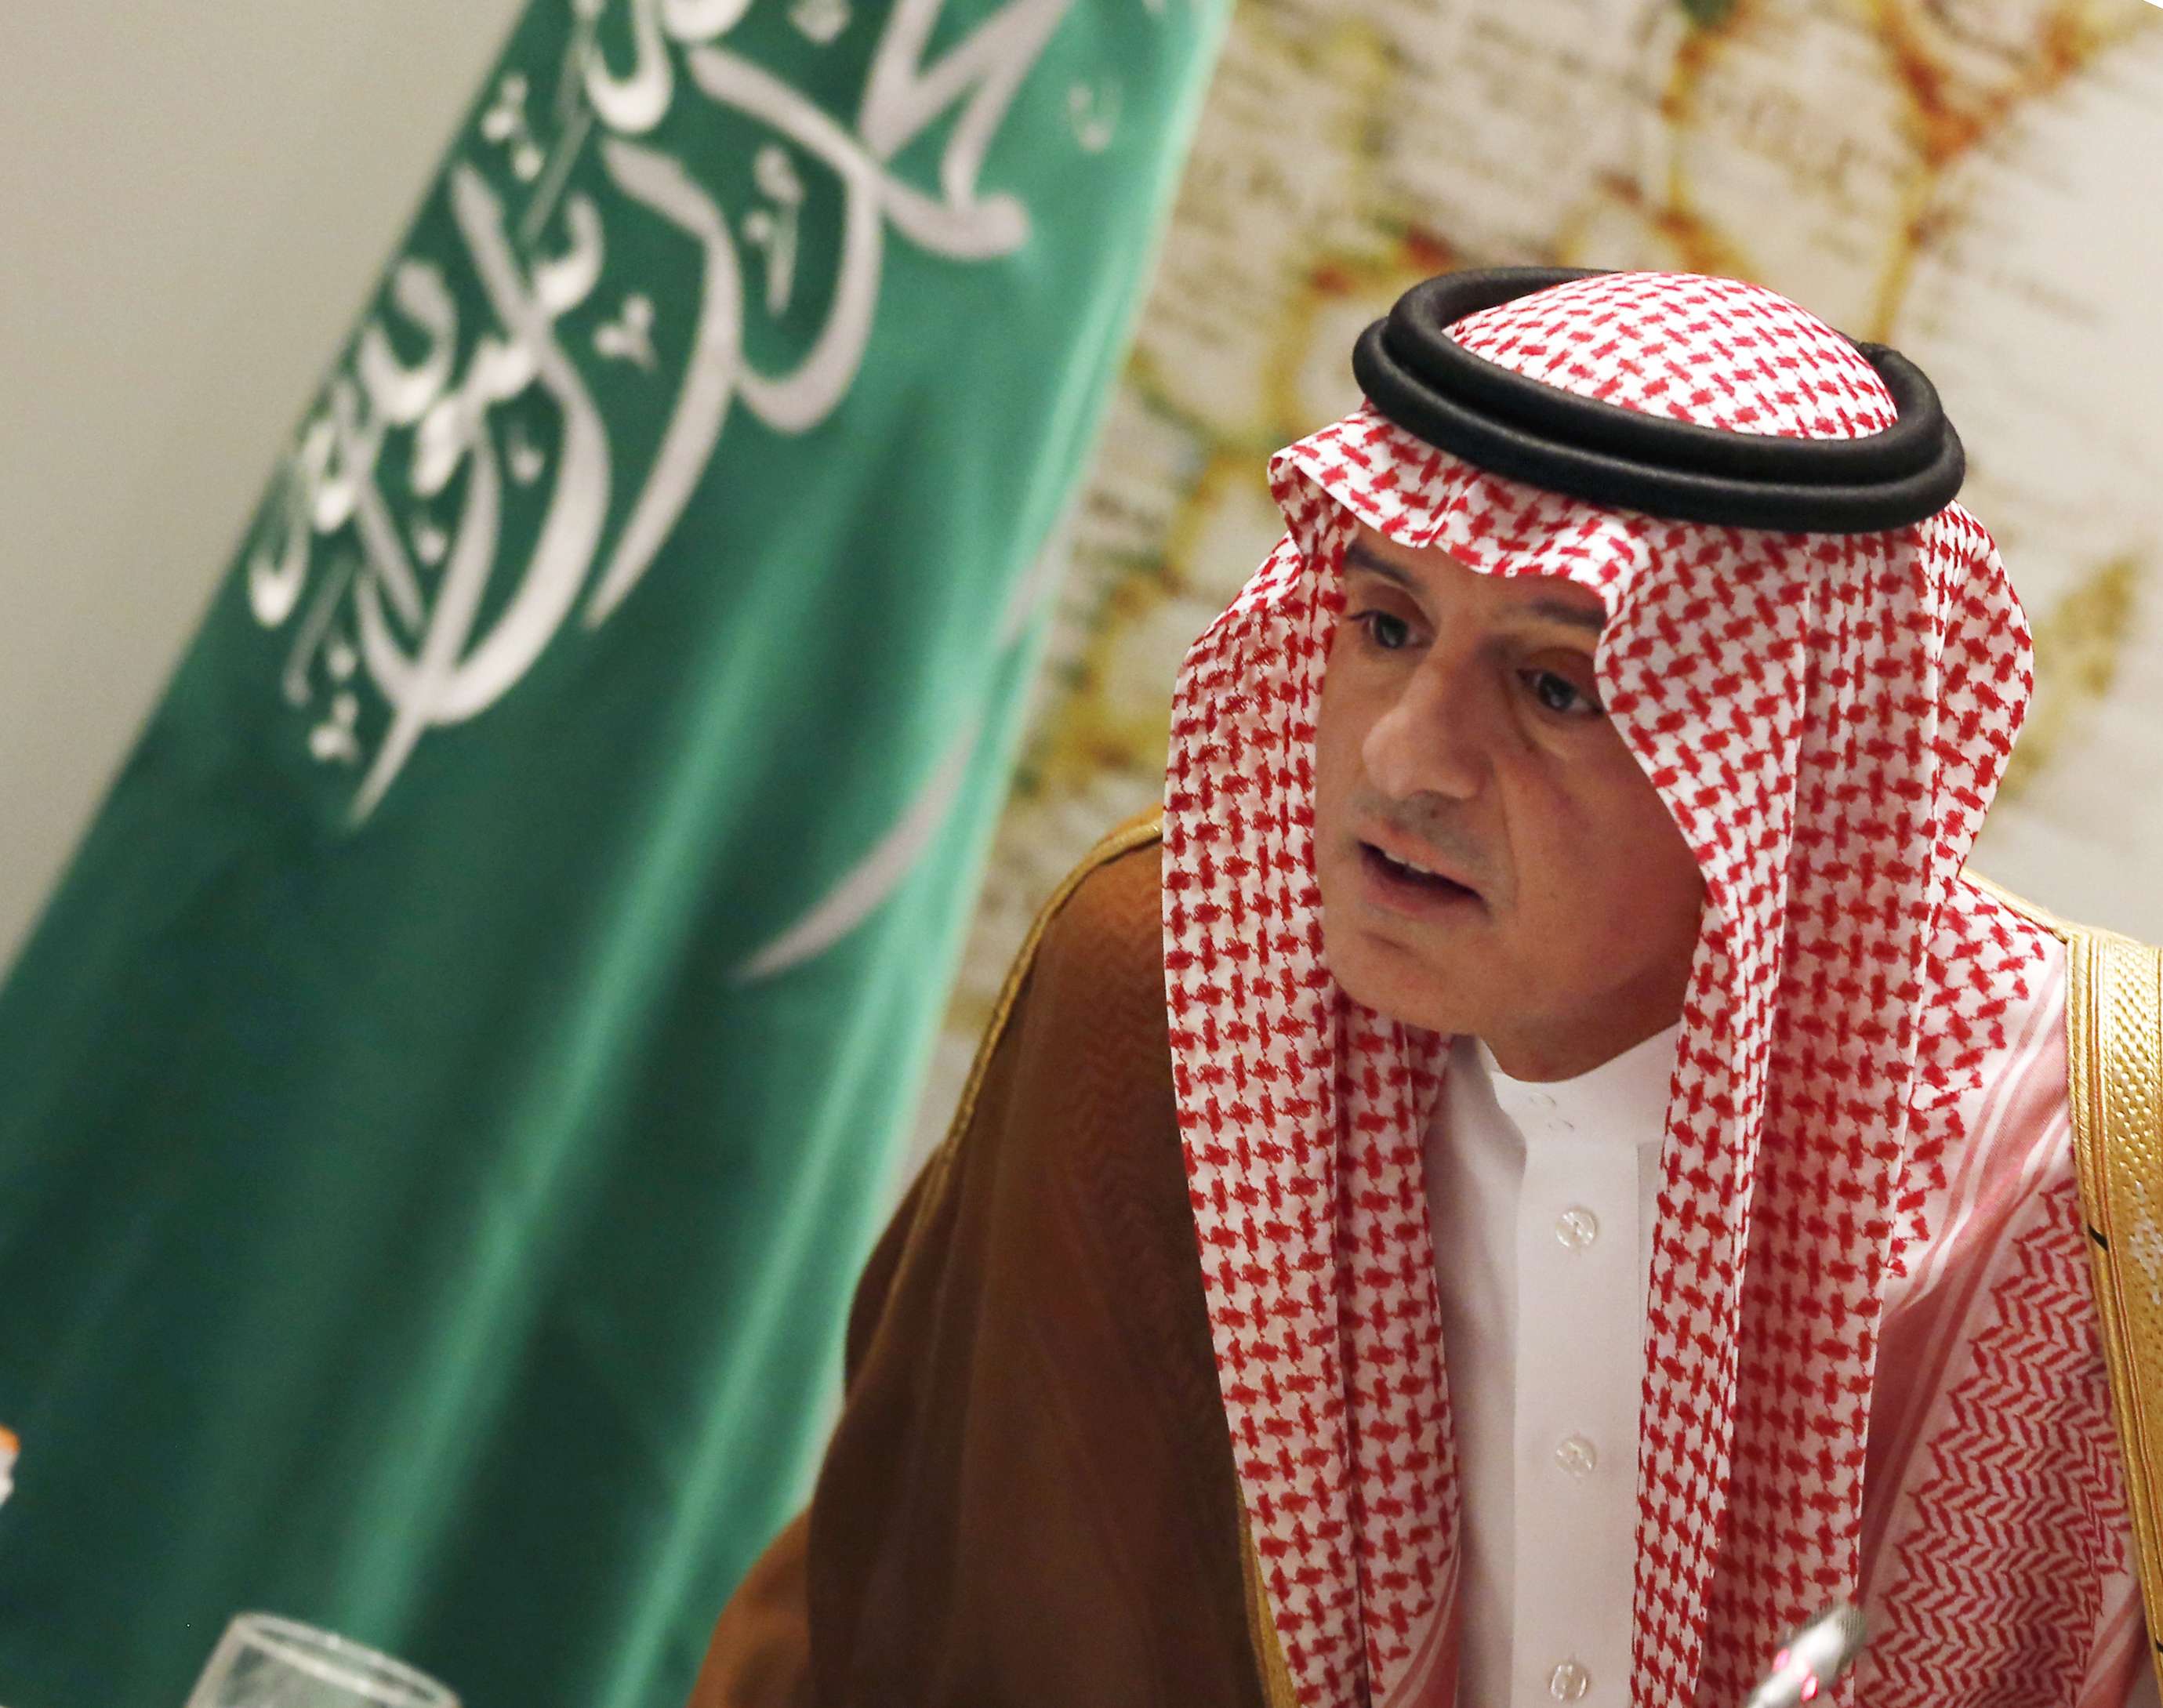 "We are certain that the launch did not come from Yemen, it came from the north," Jubeir said